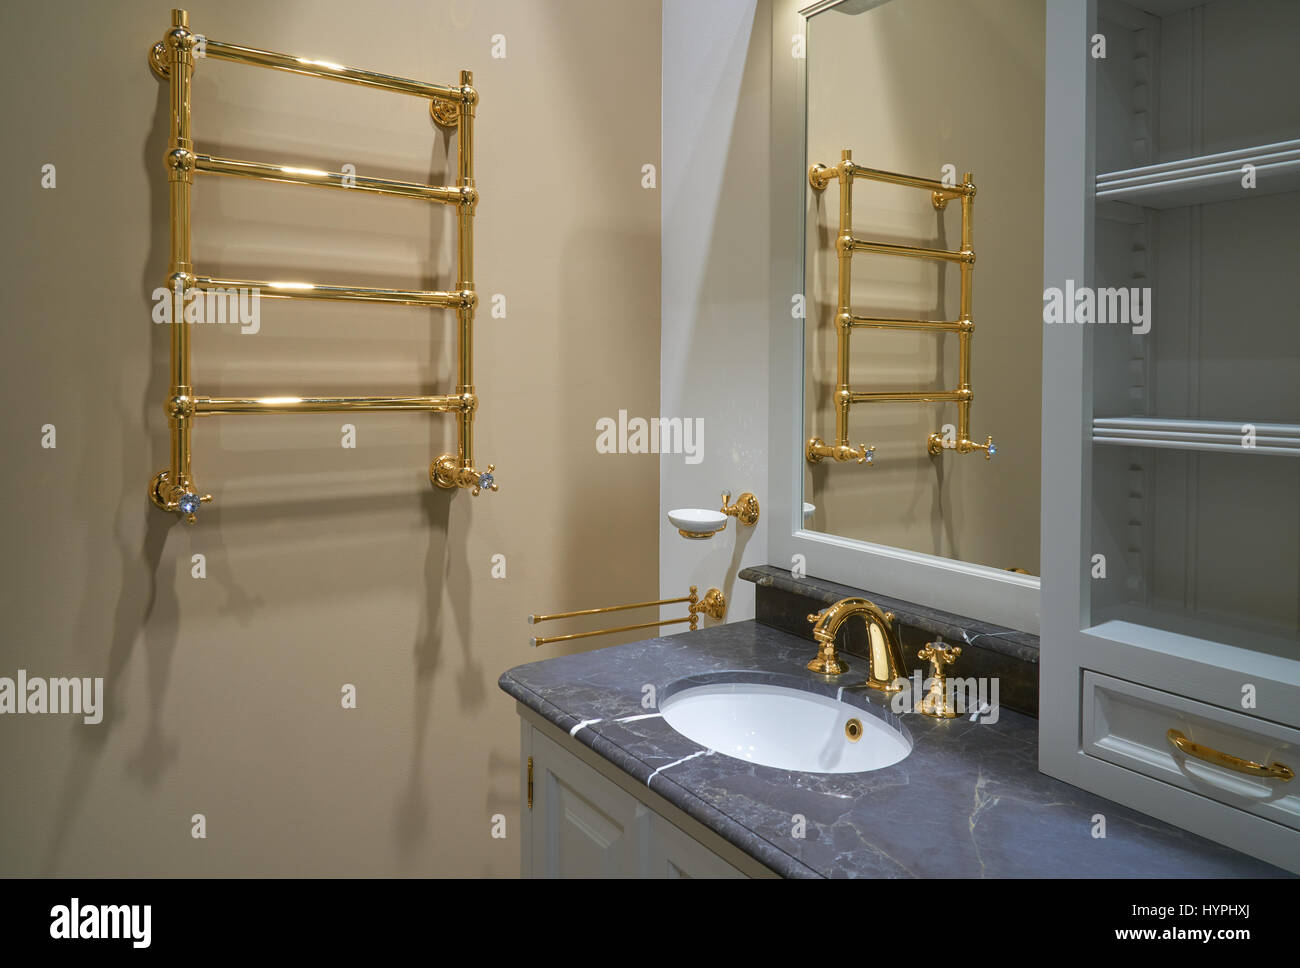 Luxury Interior bathroom with gold painted faucet and heated towel rail  Stock Photo - Alamy